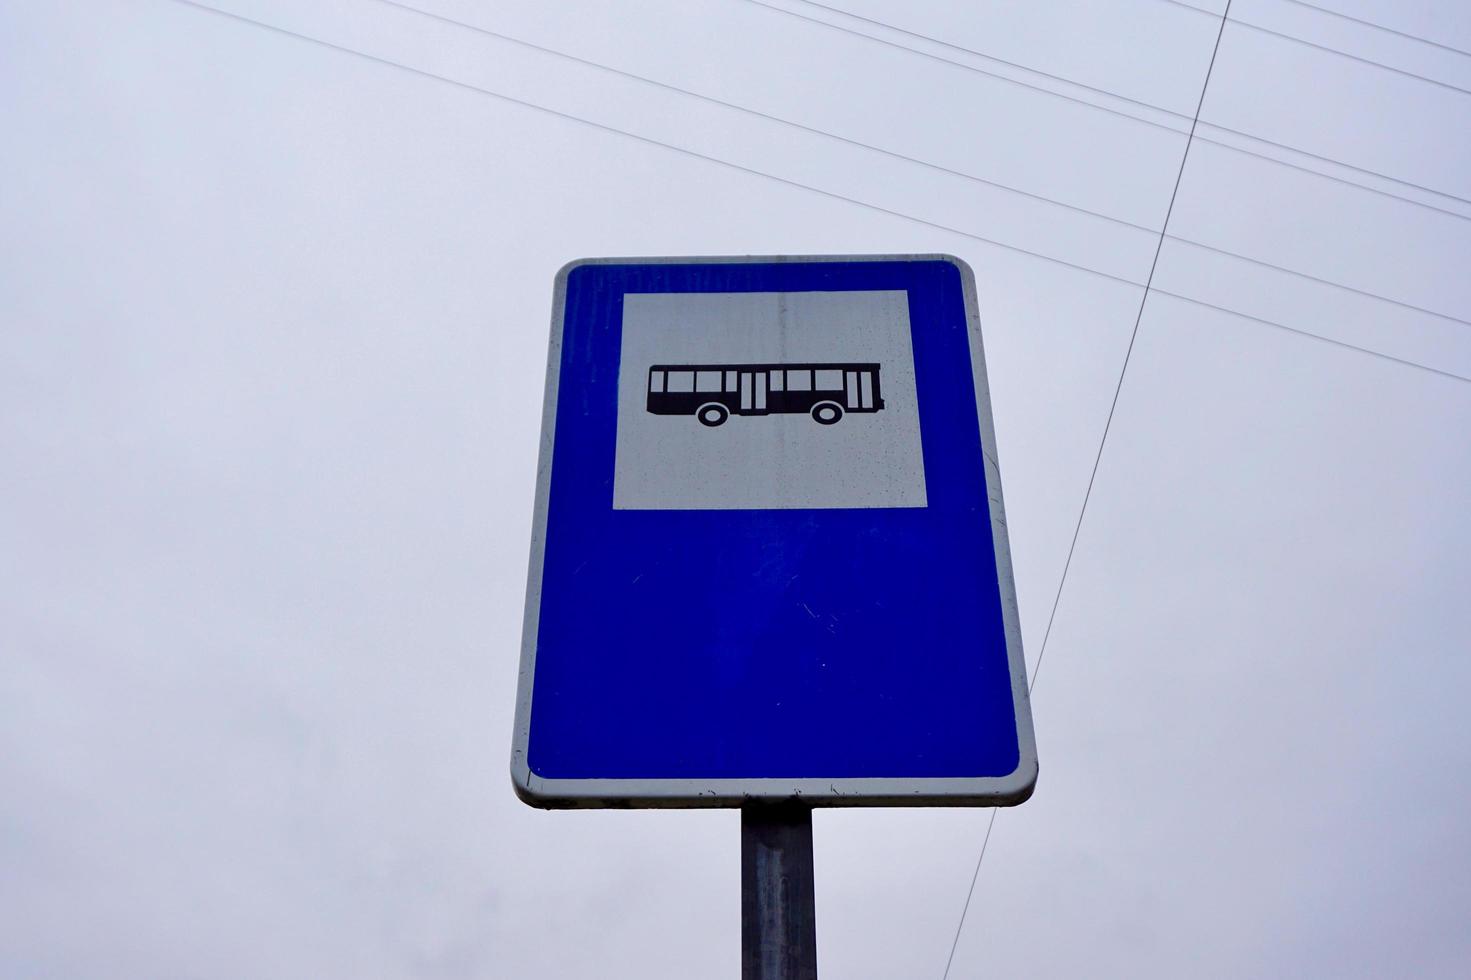 bus stop symbol on the road photo